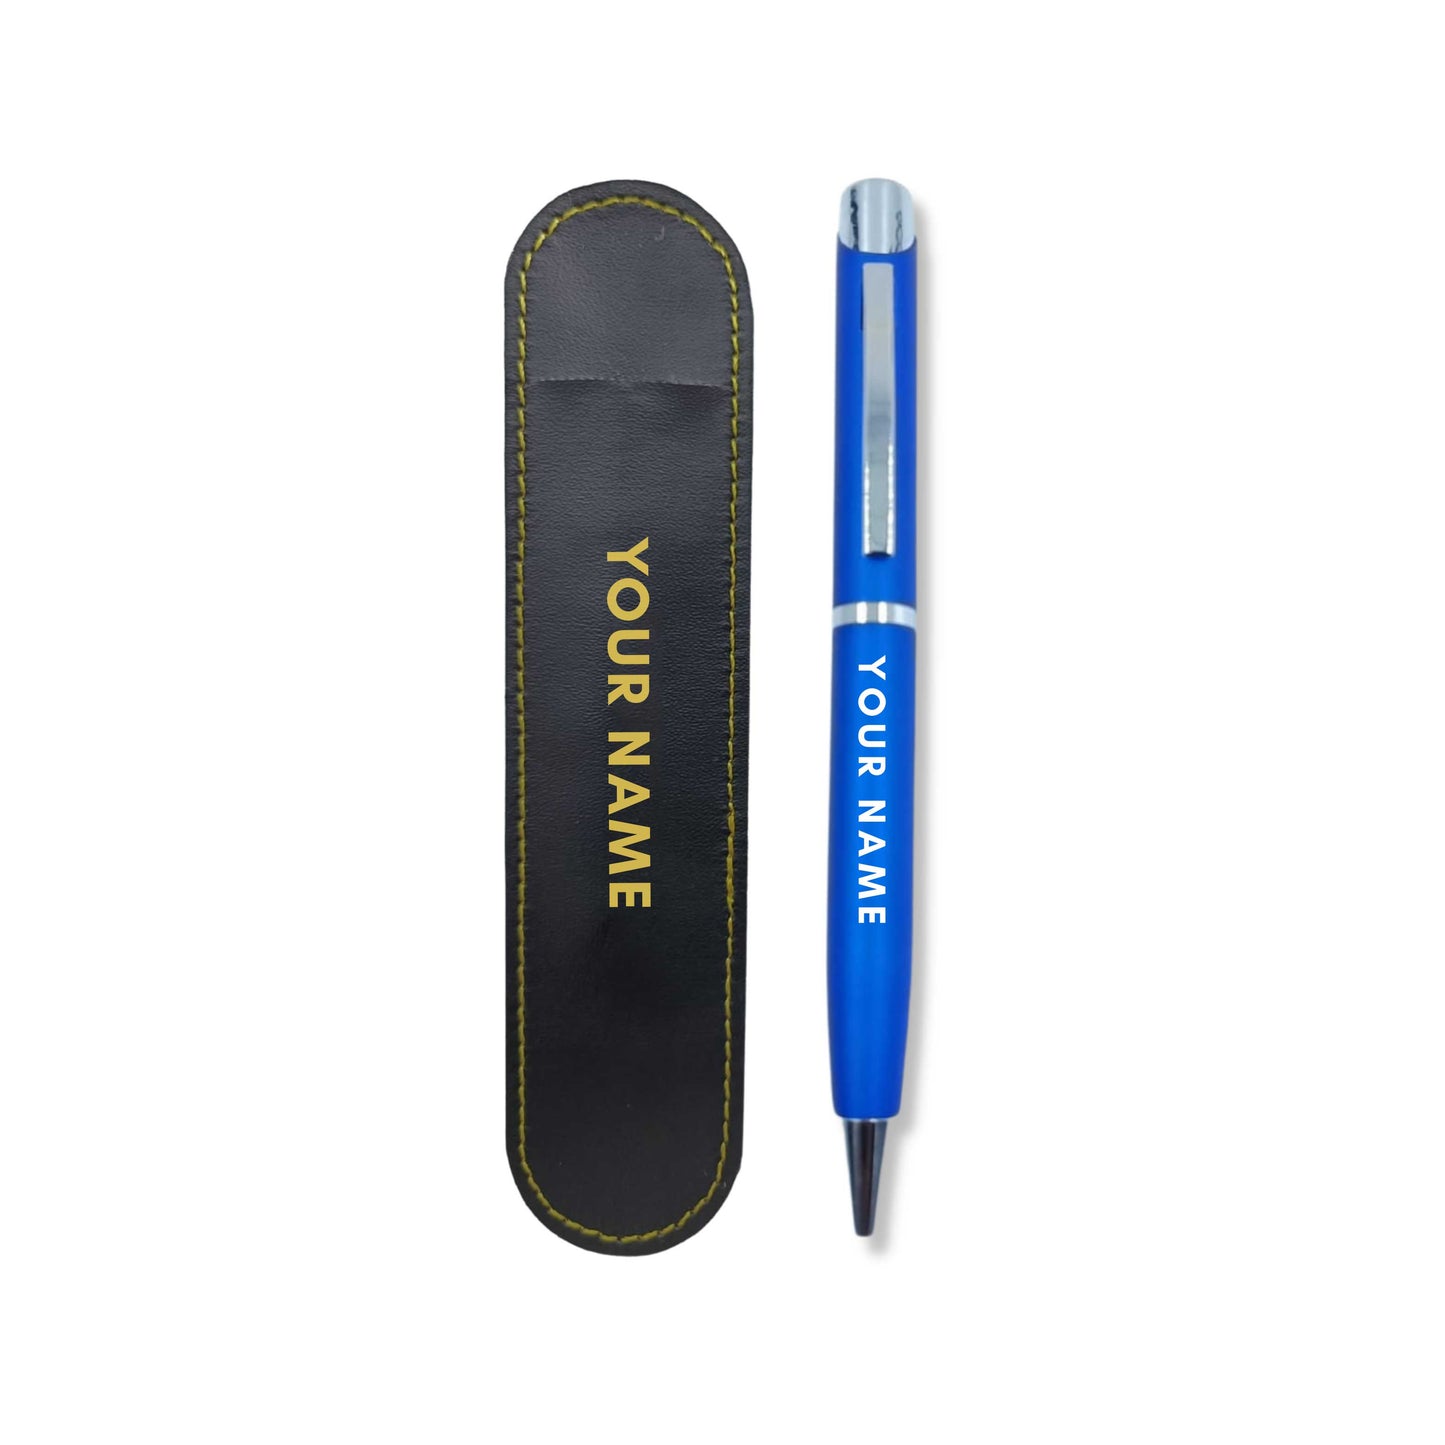 Personalized Pen With Name Engraved Birthday Gift for Colleagues Friends (Blue) - Add Name